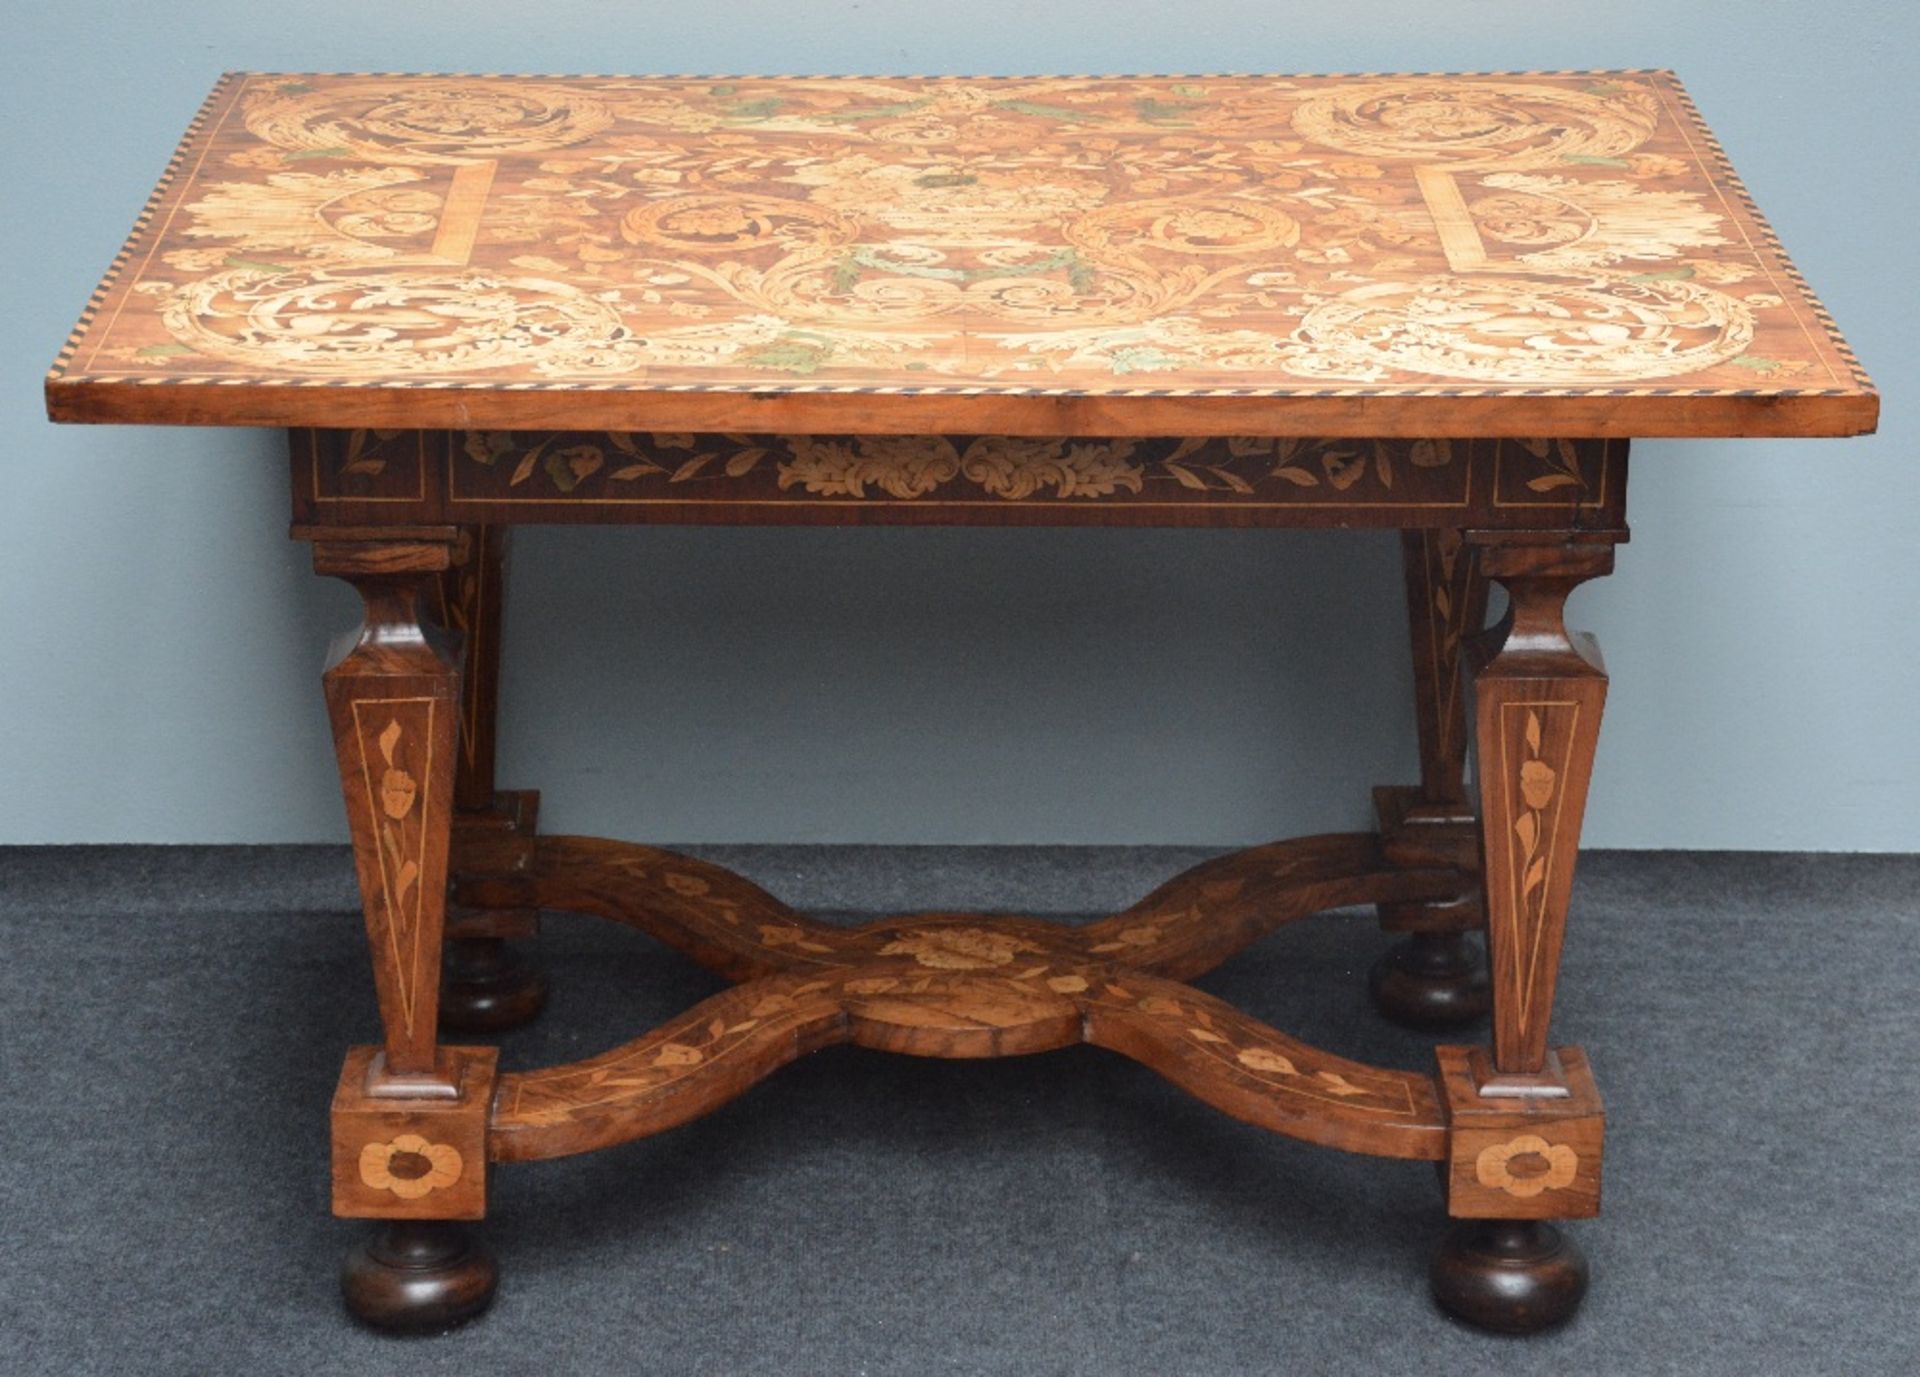 An exceptional LXIV-style Dutch writing desk with walnut veneer and marquetry, early 18thC; added - Bild 3 aus 11